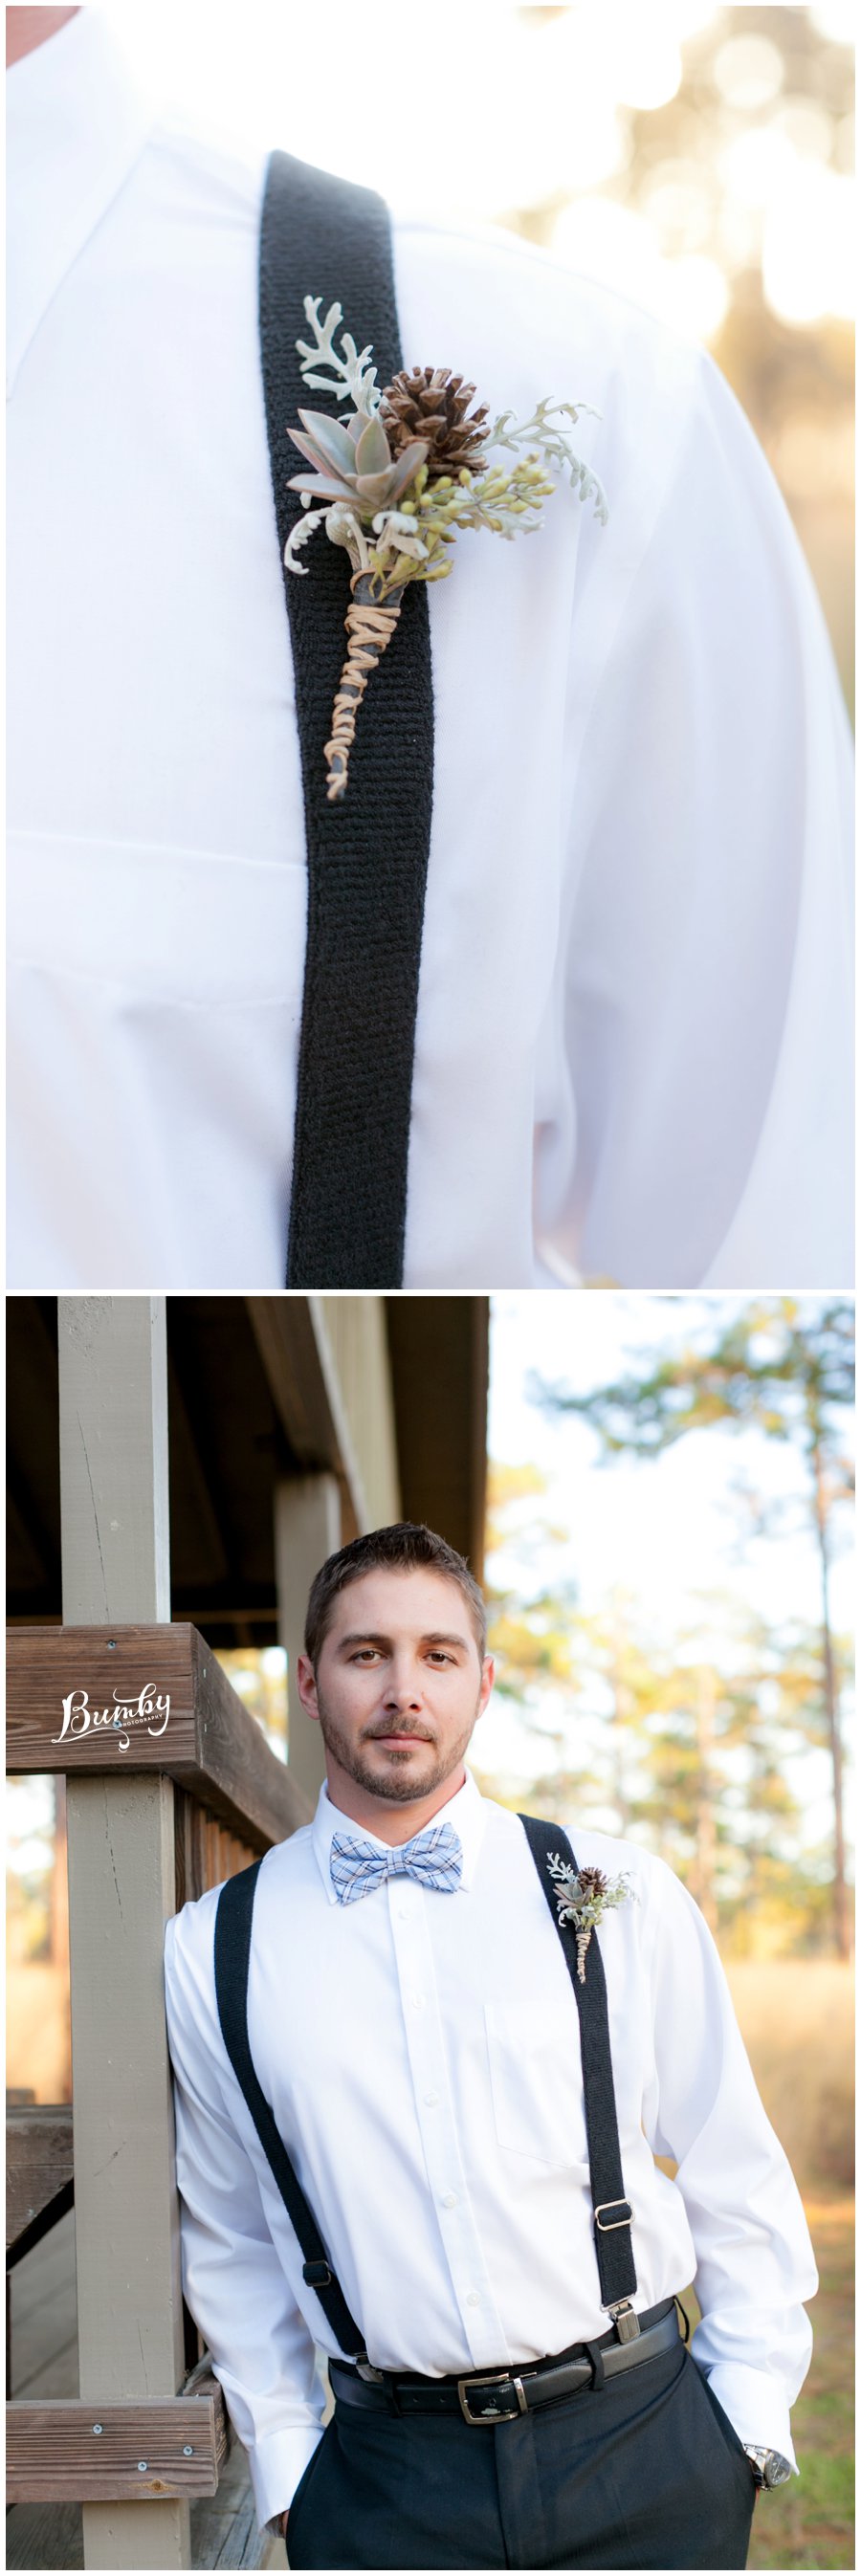 Rustic-Boutonniere-Bumby-Photography_0039